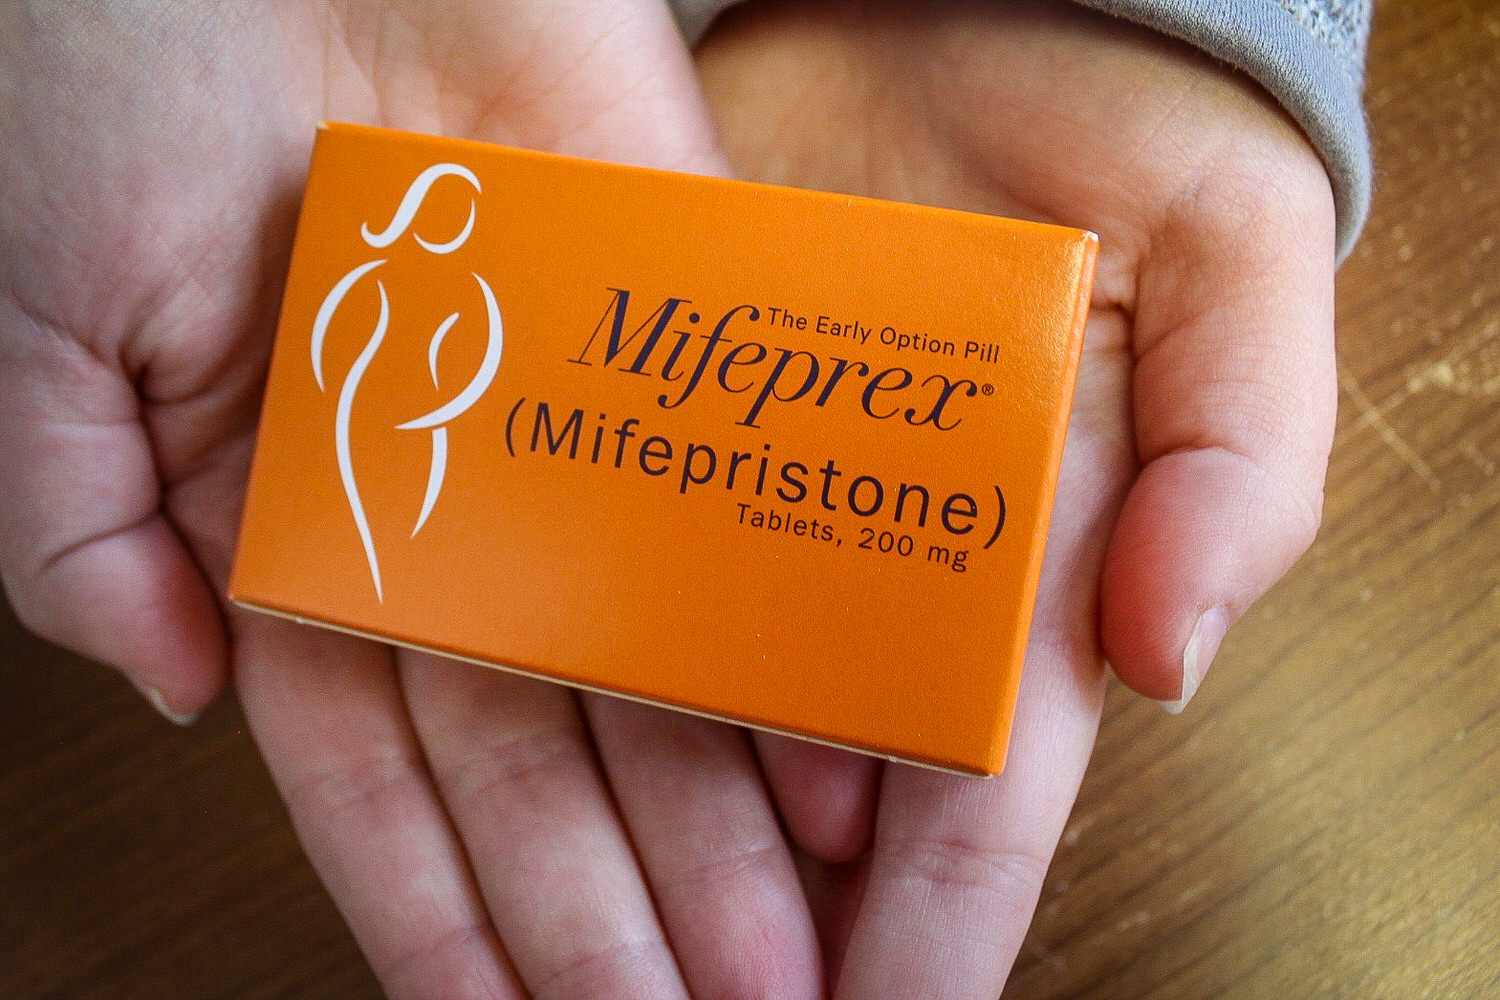 Two hands holding up a box of mifeprex, the abortion pill